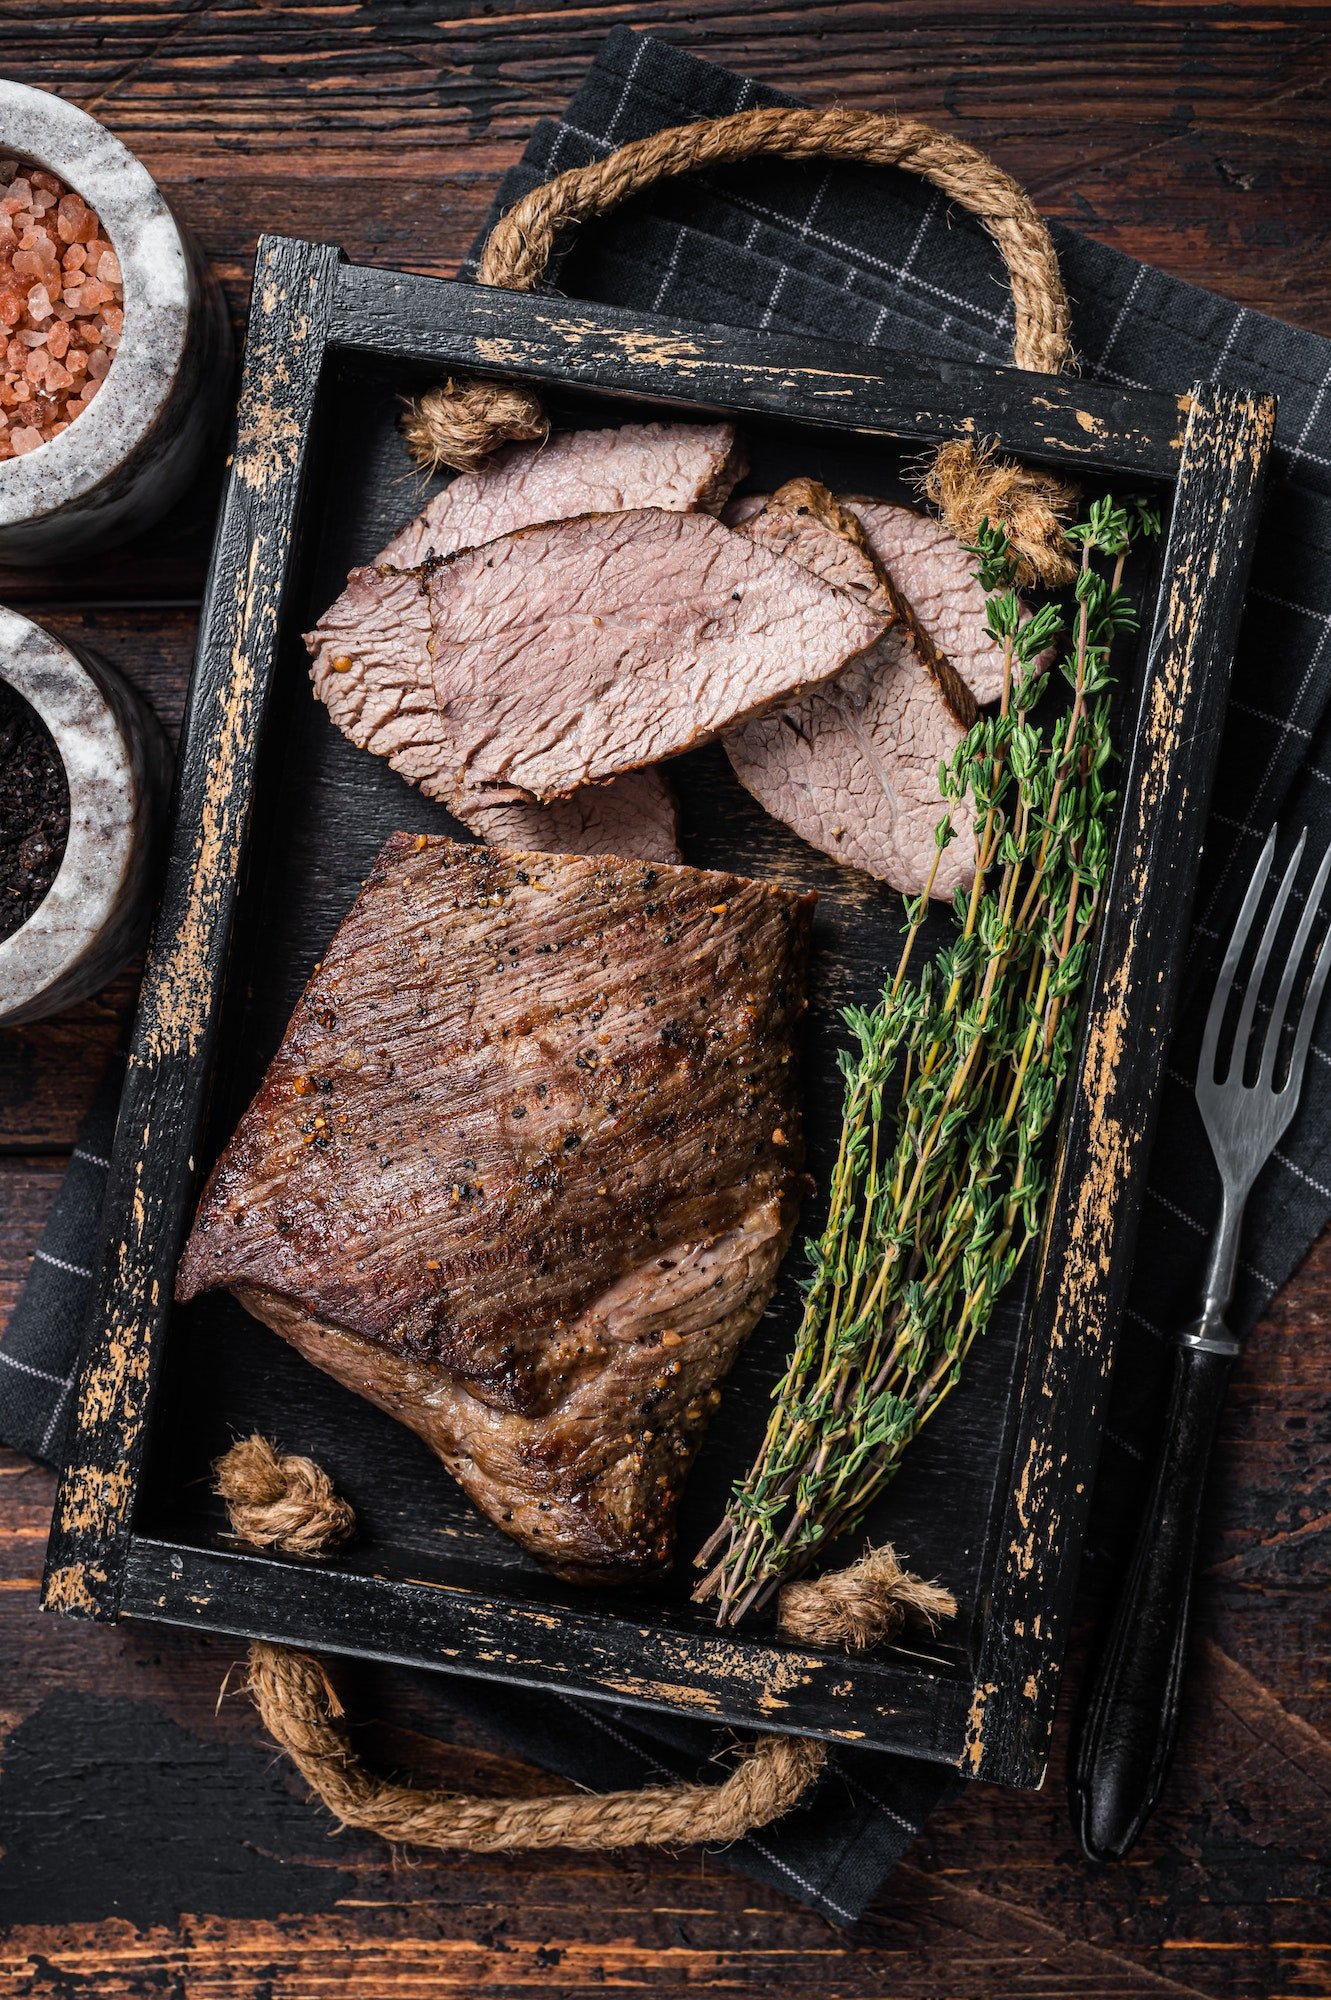 grilled-tri-tip-steak-sirloin-bottom-beef-in-a-tray-with-herbs-wooden-background-top-view.jpg